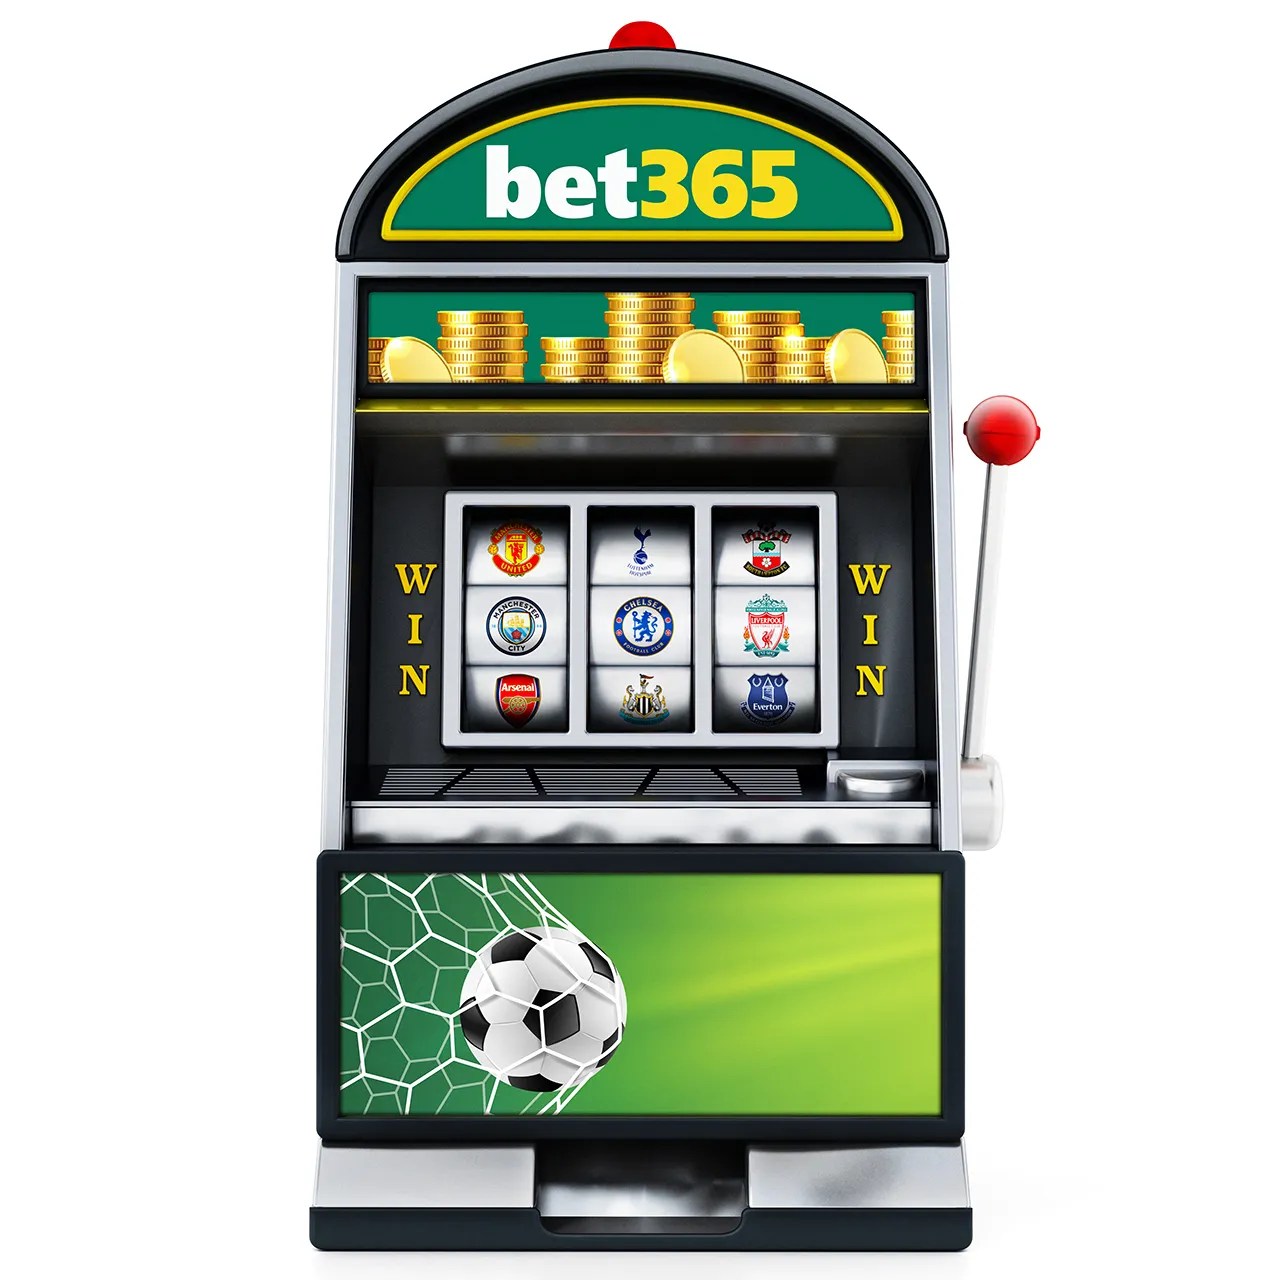 Join The Fun At Bet365: India's Top Casino Site For Big Wins